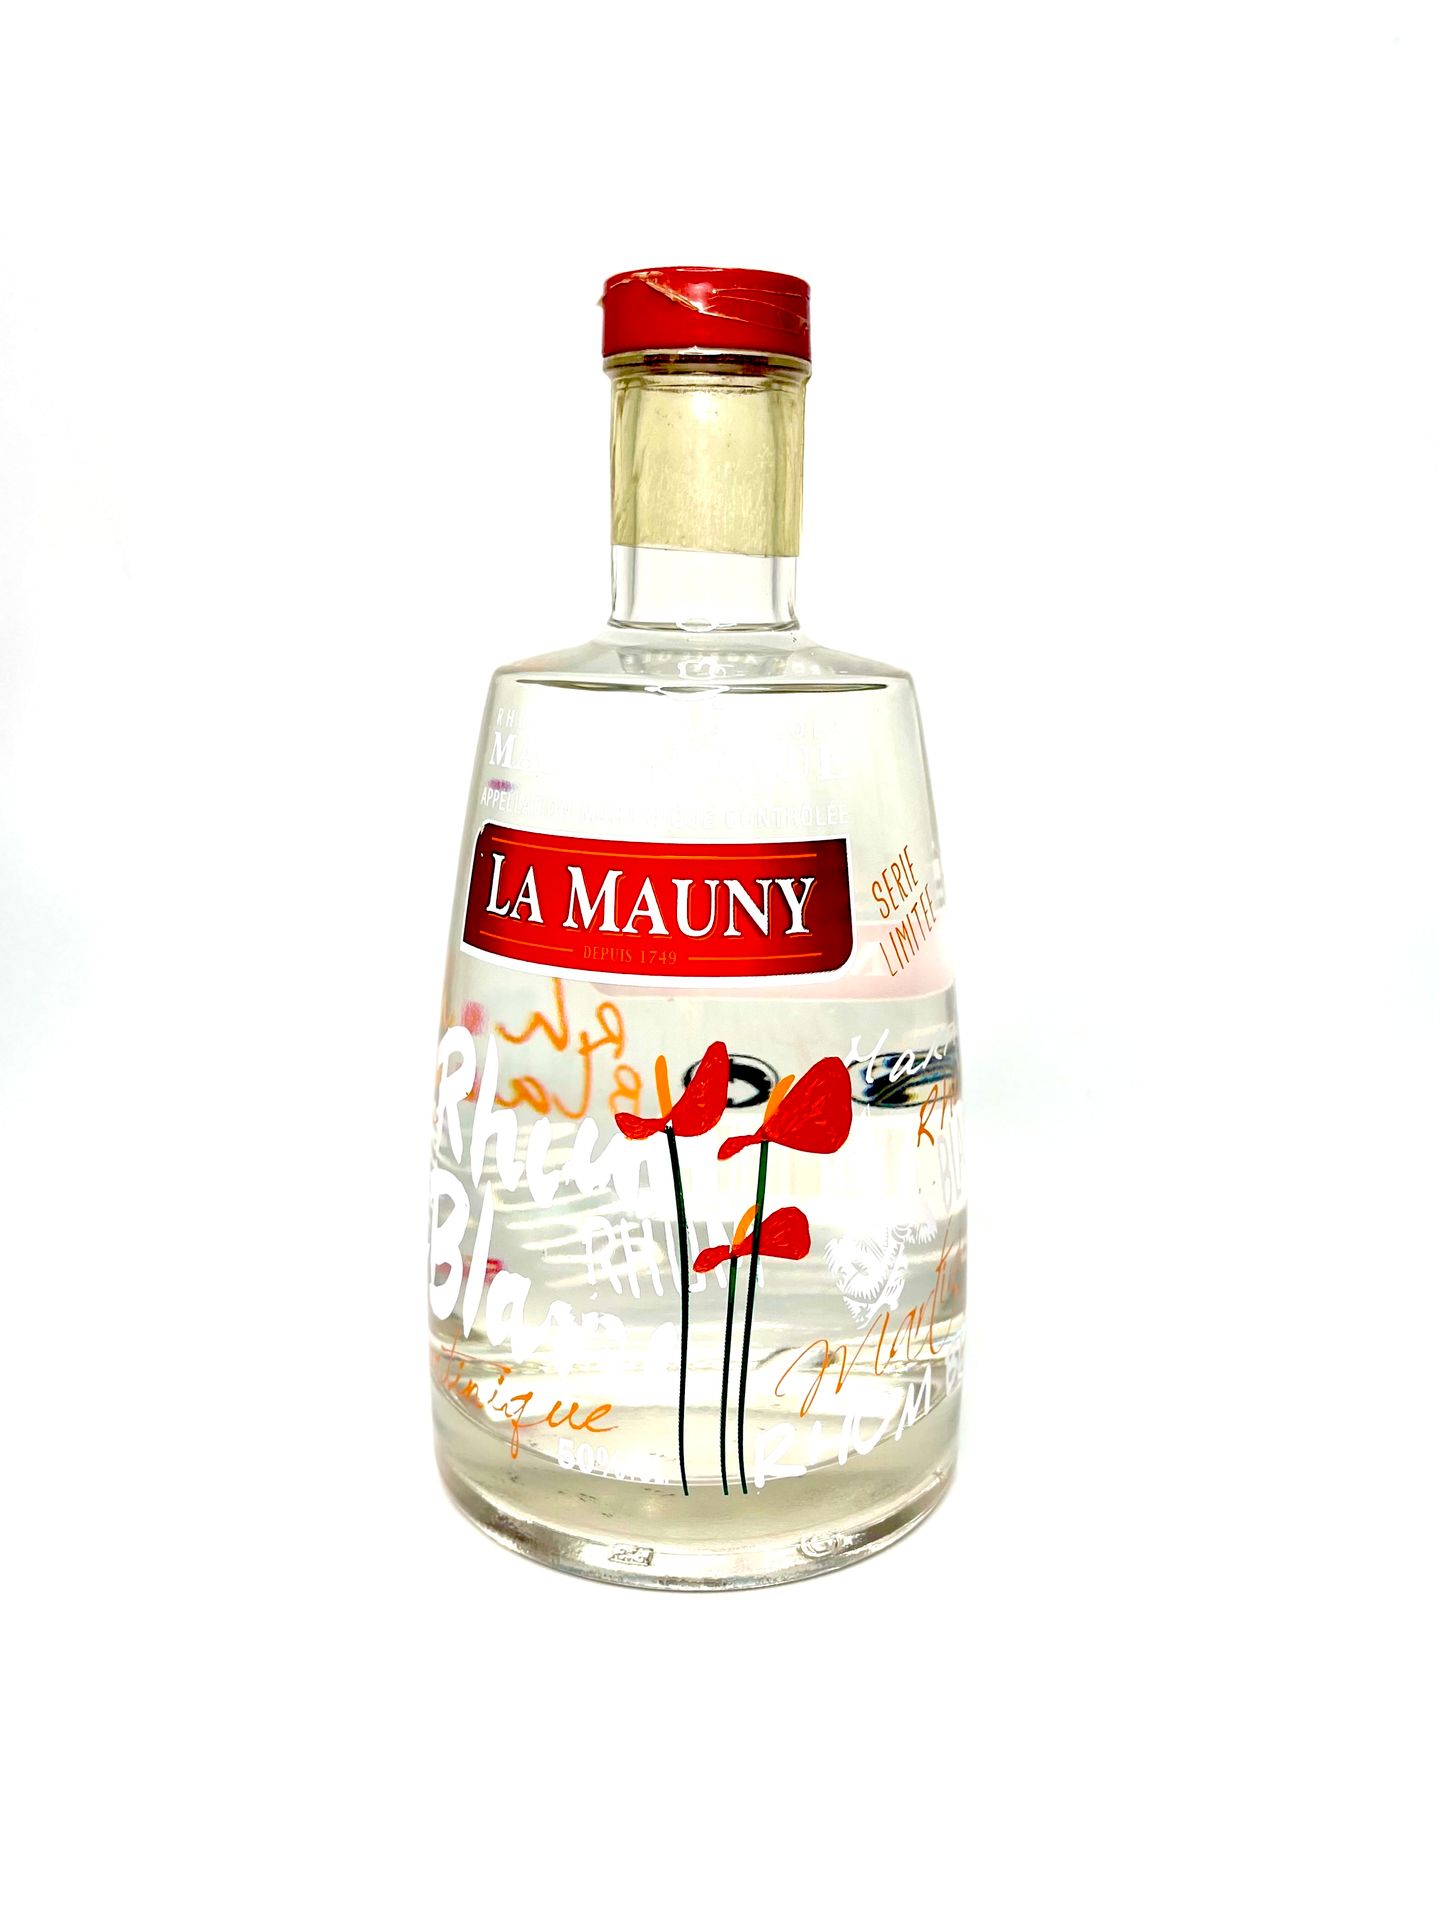 Null LA MAUNY

White agricultural rum 50°, Martinique AOC.

Limited series Flowe&hellip;